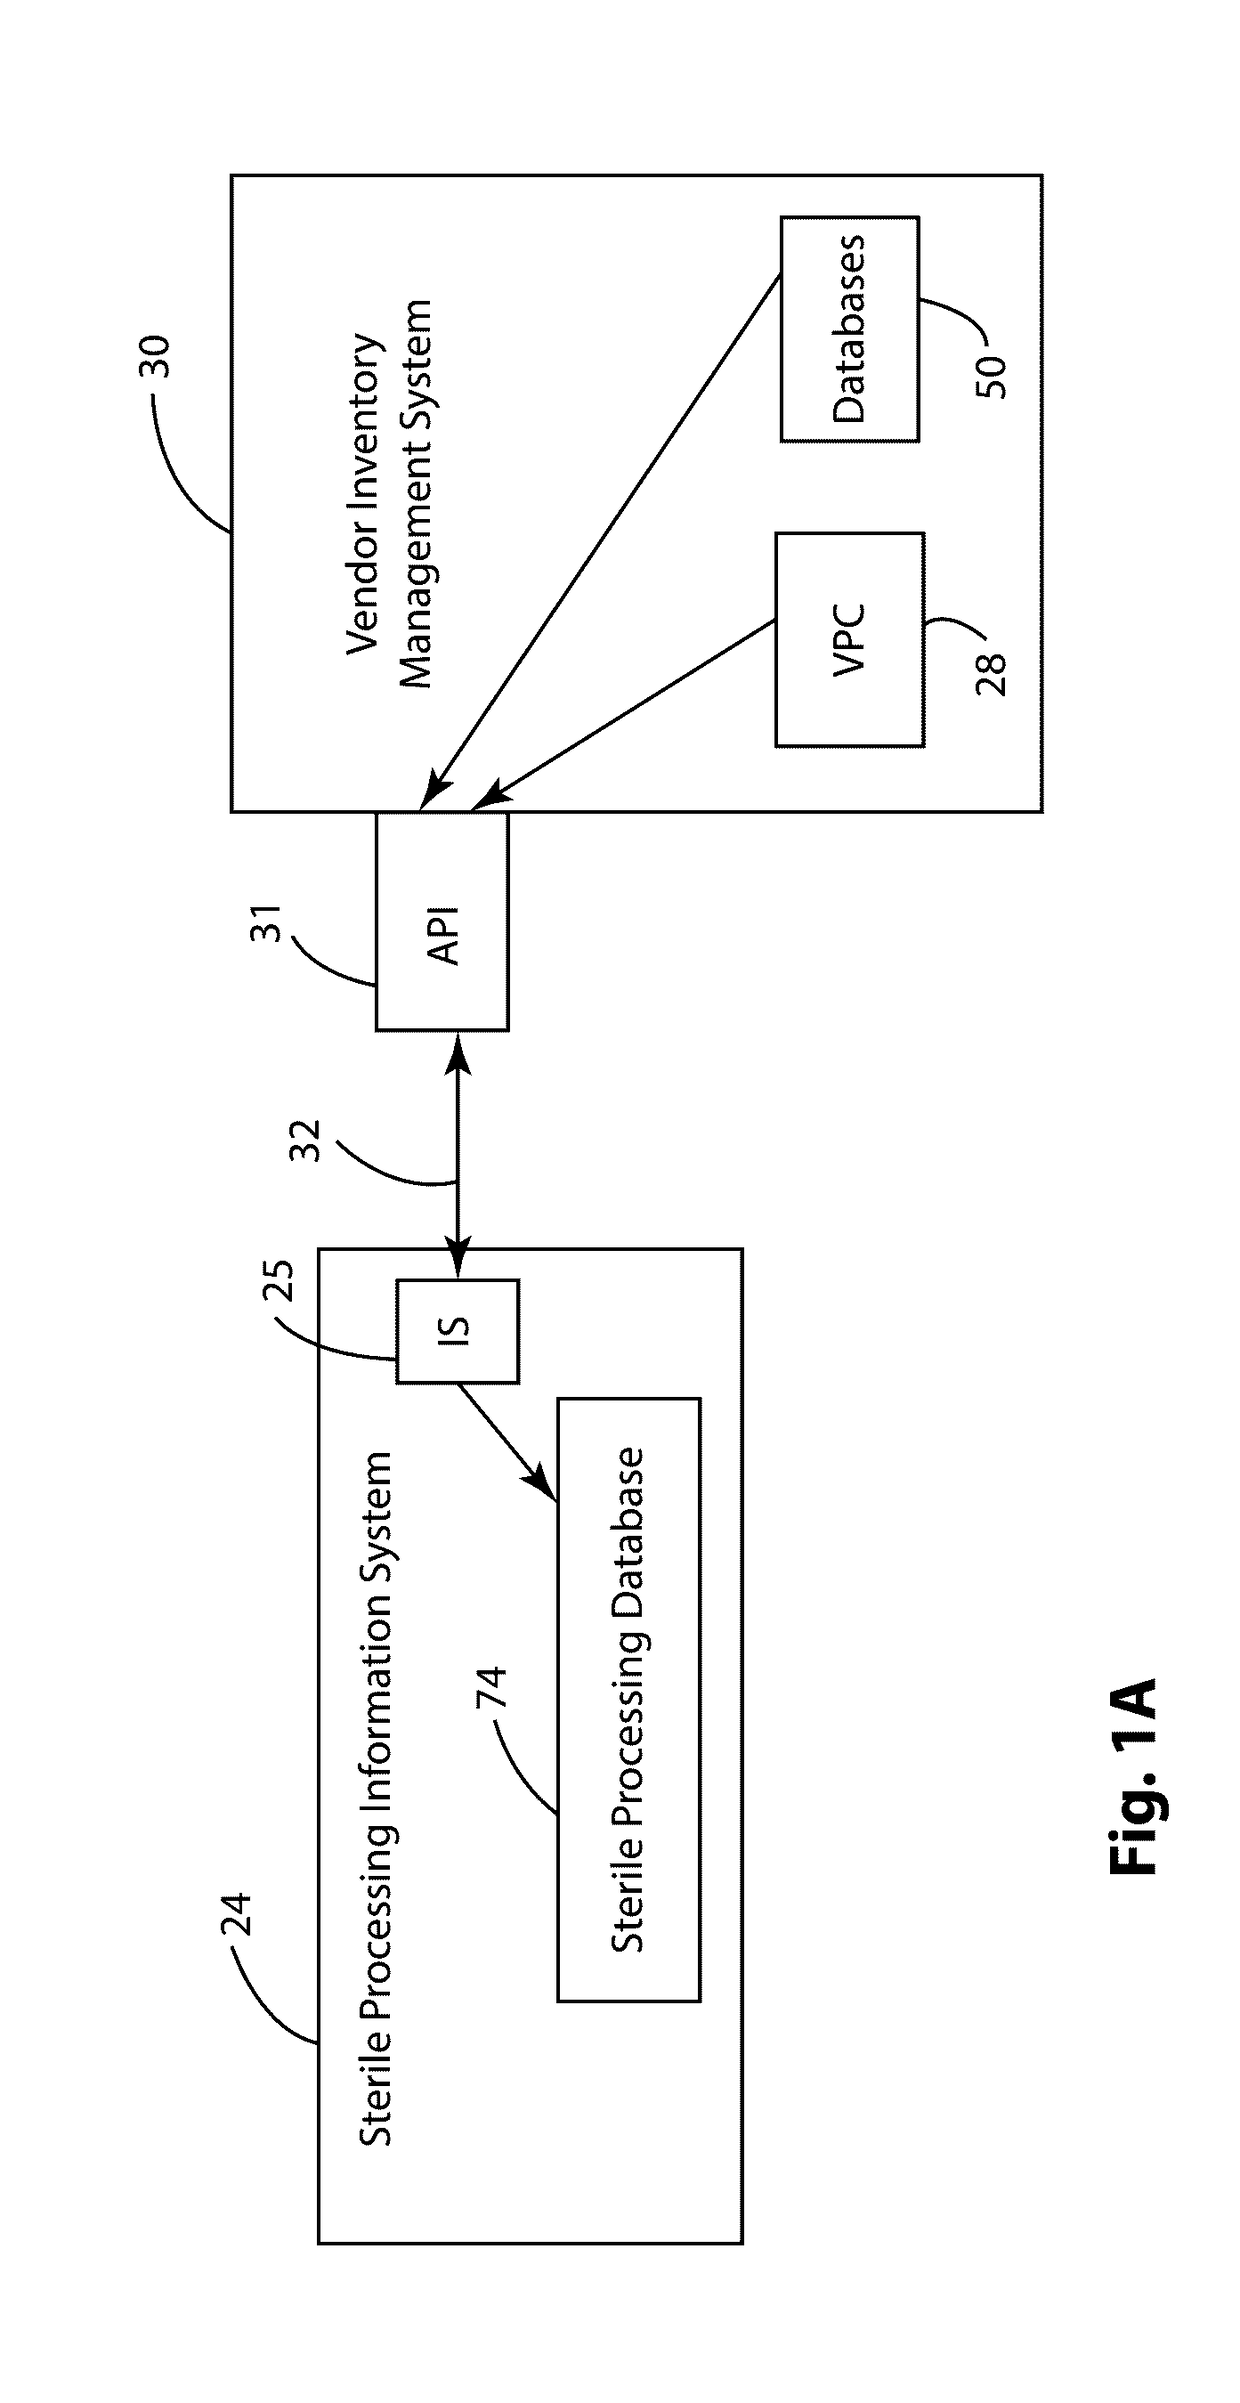 Systems and Methods for Tracking Surgical Inventory and Sterilization